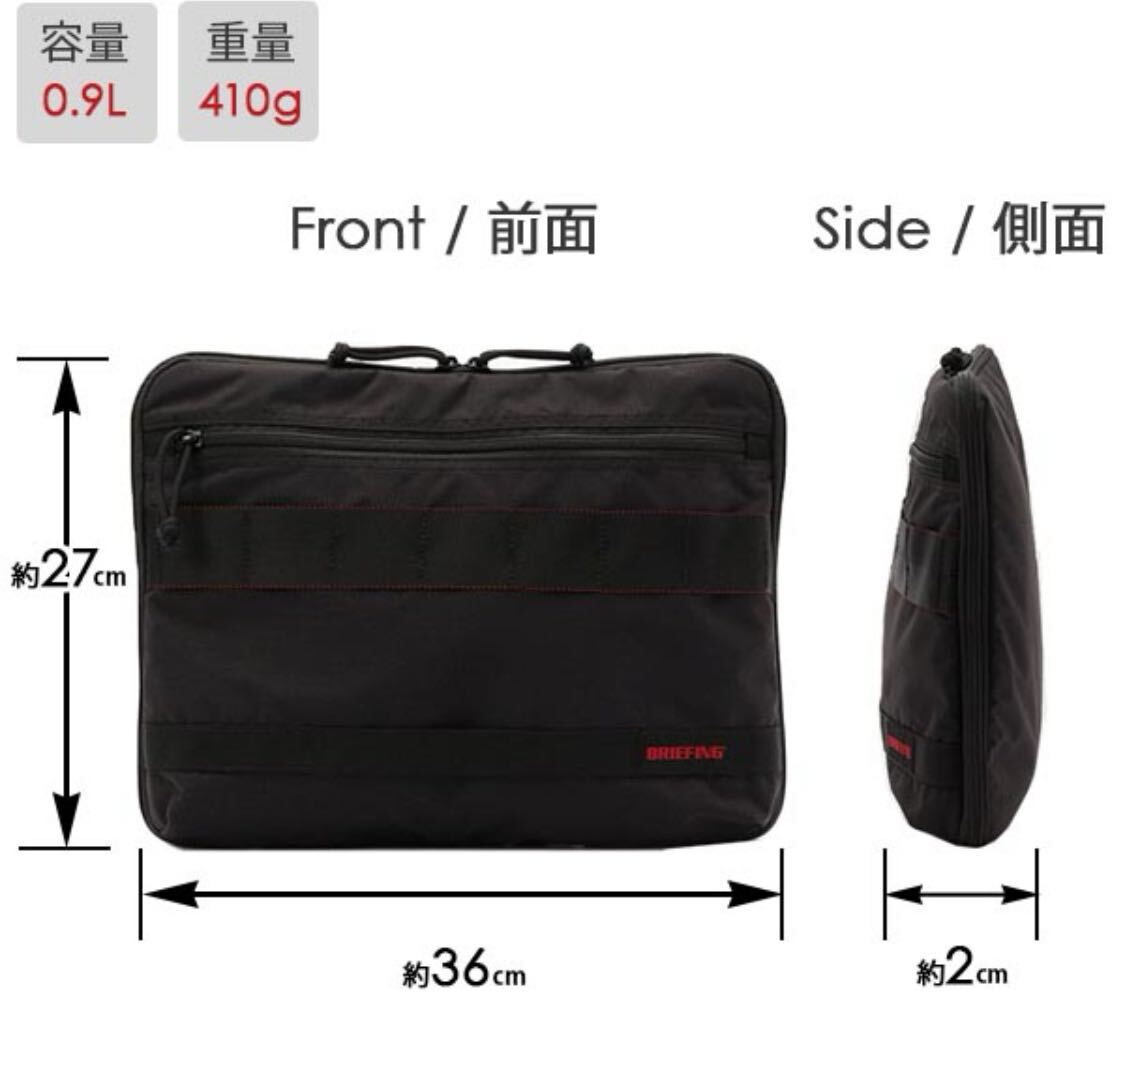 BRIEFING personal computer case briefcase business bag Briefing handle attaching black PC CASE TALL 13 MW BRA193A24 new goods regular goods back 